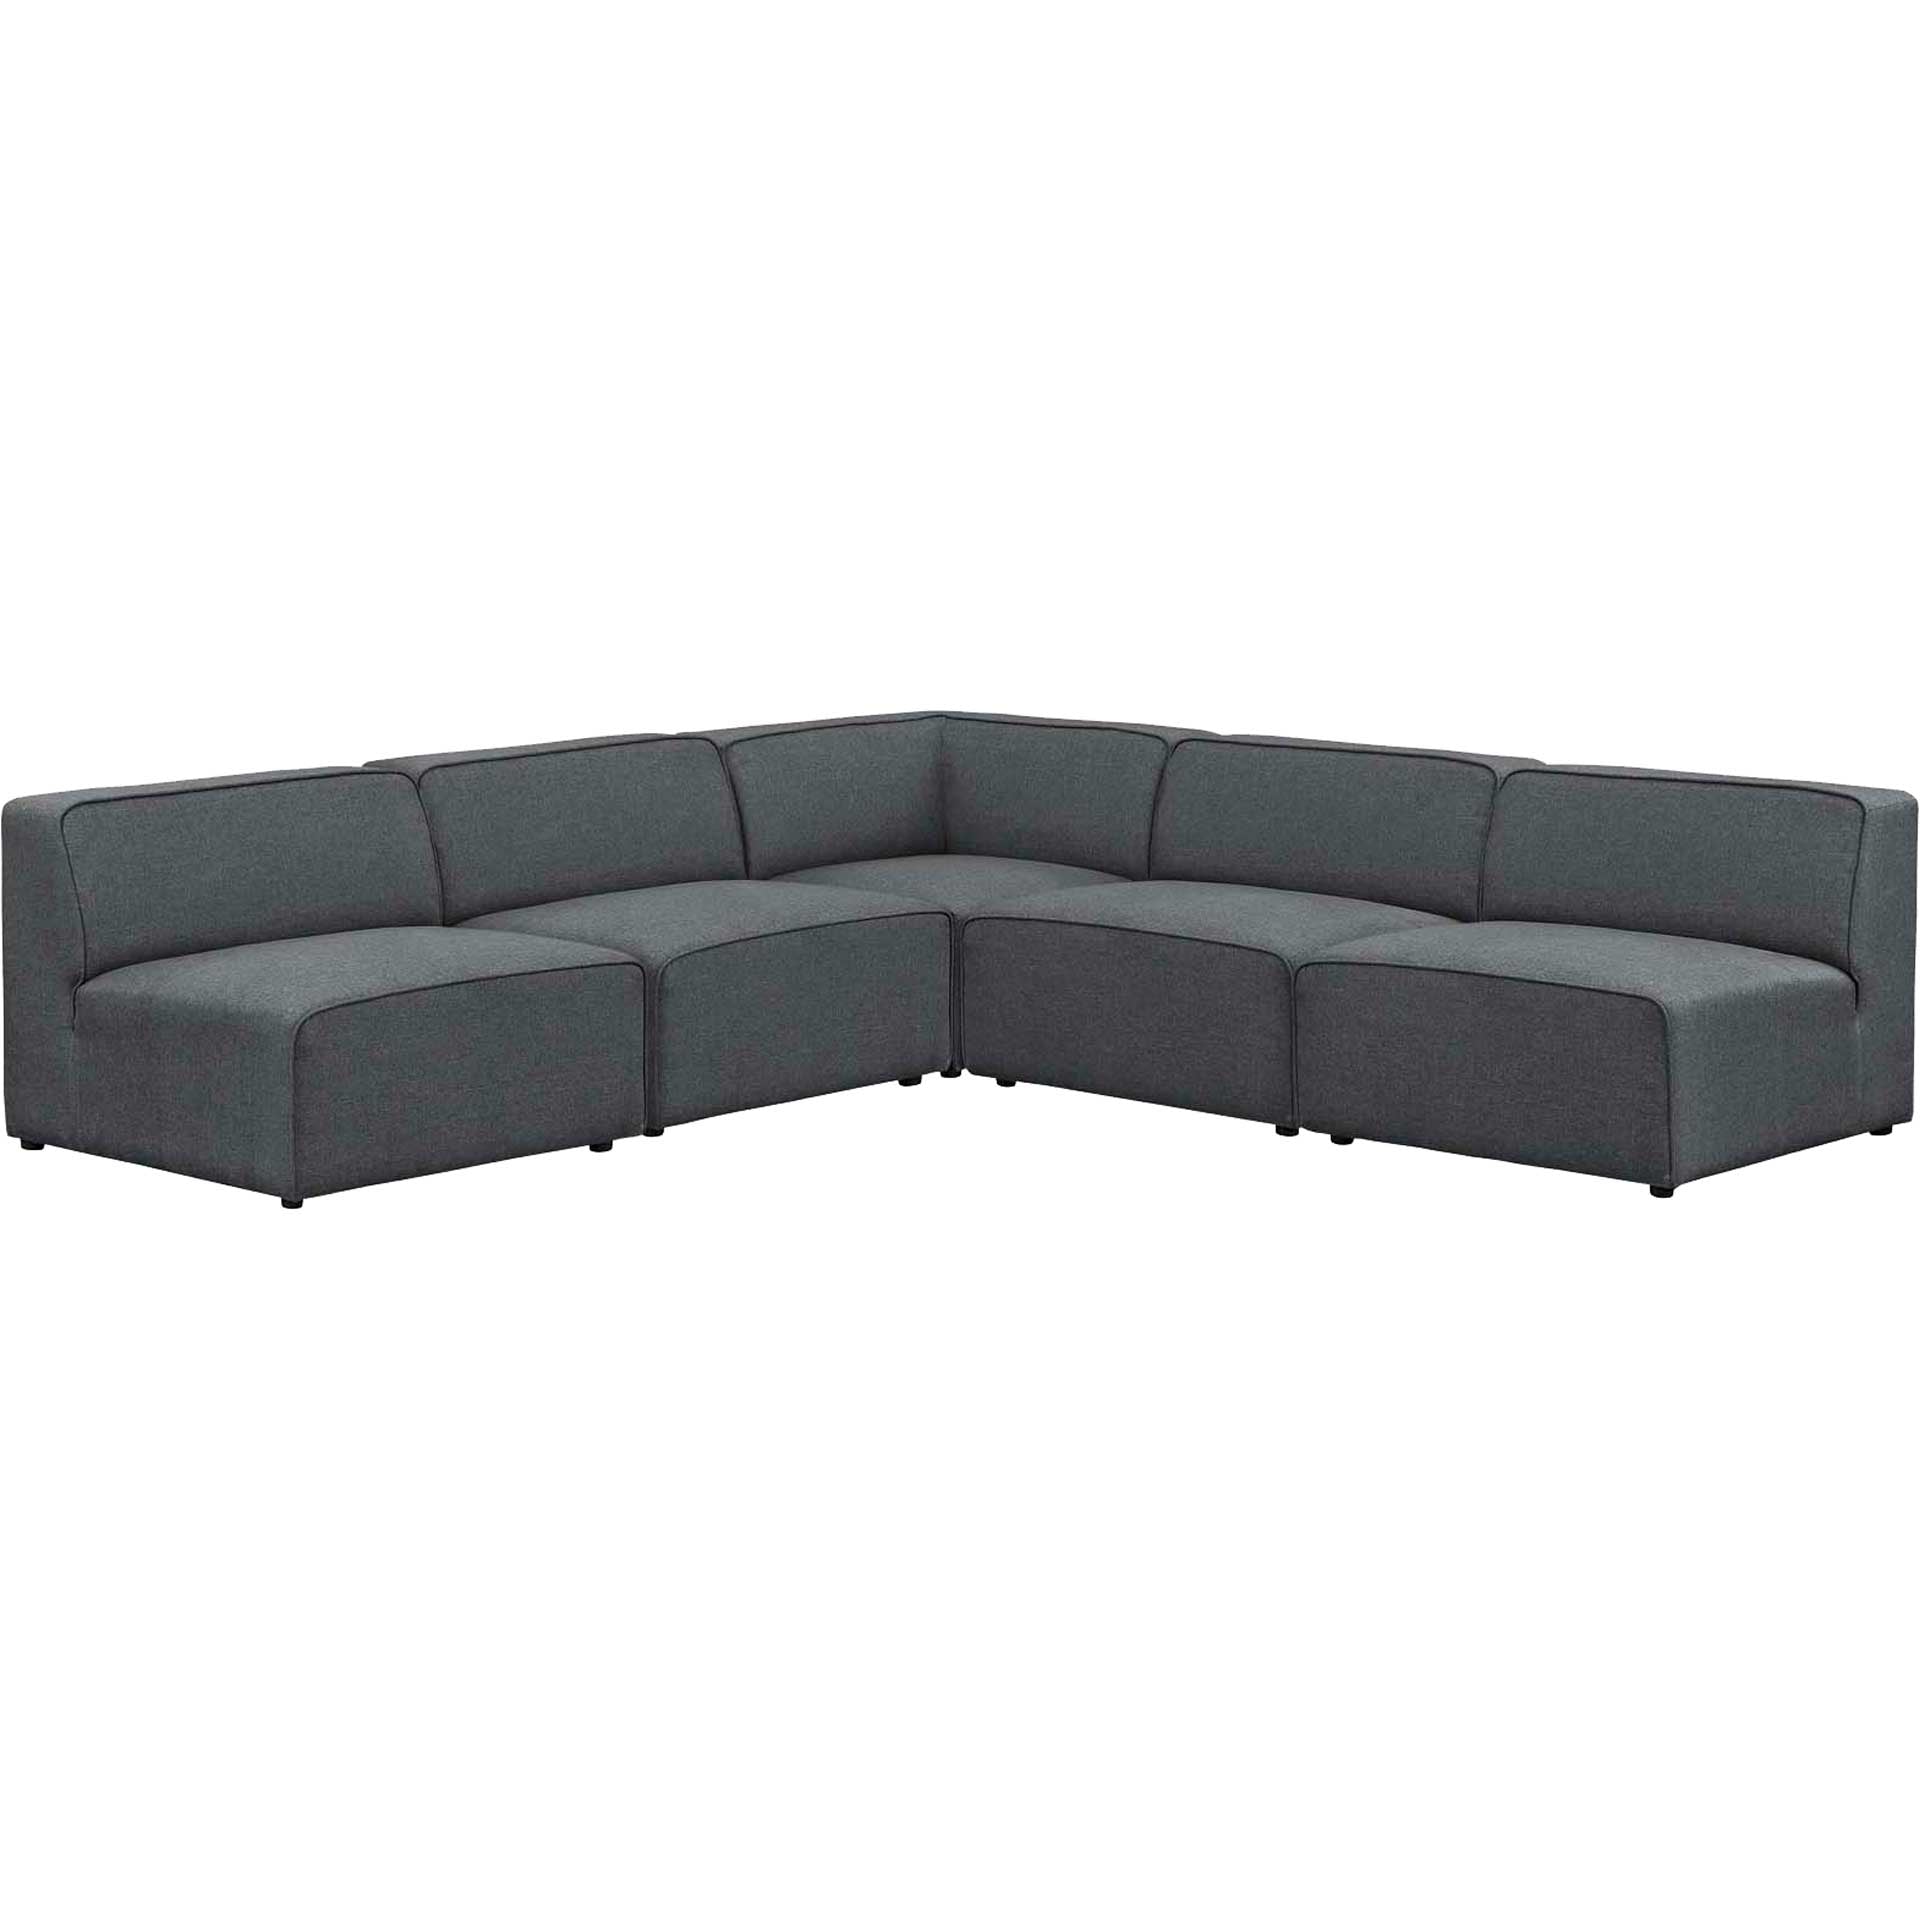 Maisie 5 Piece L-Shaped Armless Sectional Sofa Gray